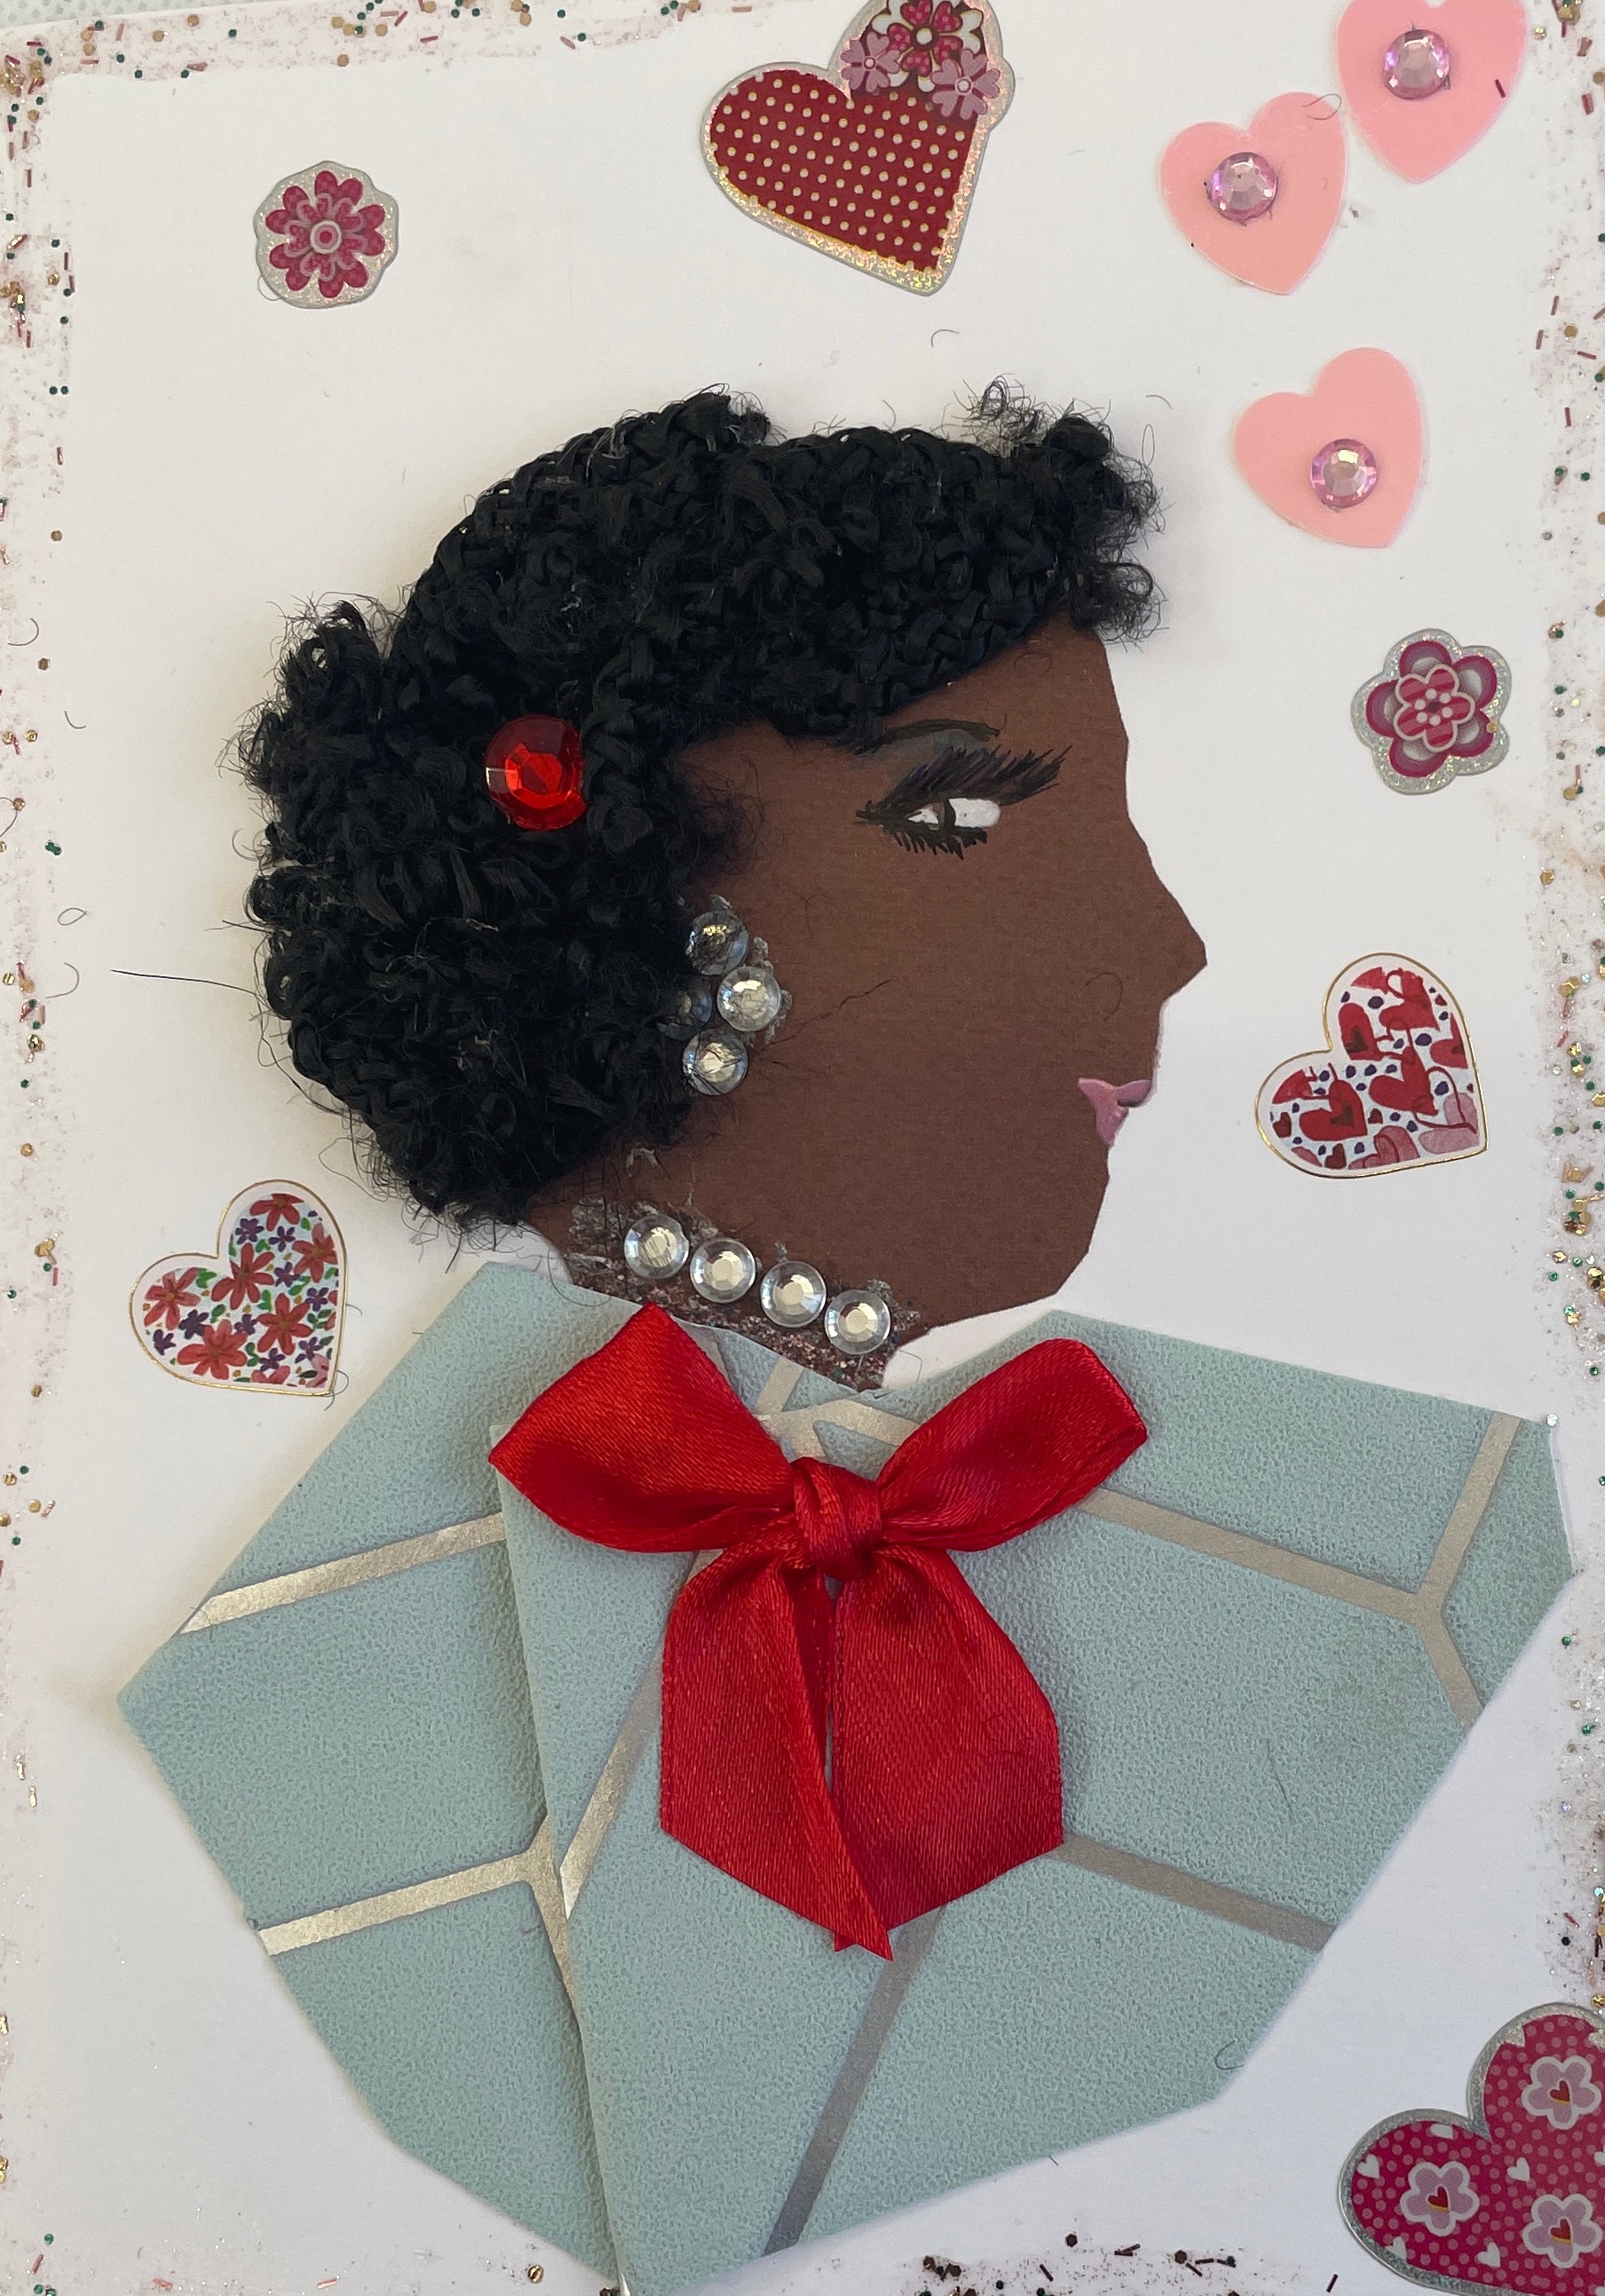 This card is of a woman given the name Happy Hampshire. Happy Hampshire wears a pale blue blouse with a silver line pattern running through and a red bow on the front of it. Her necklace and earrings are both diamanté gems, and there is a red gem in her short, black, curly hair. Surrounding her there are red and pink hearts with various patterns, and a glitter border surrounding the entire card.  